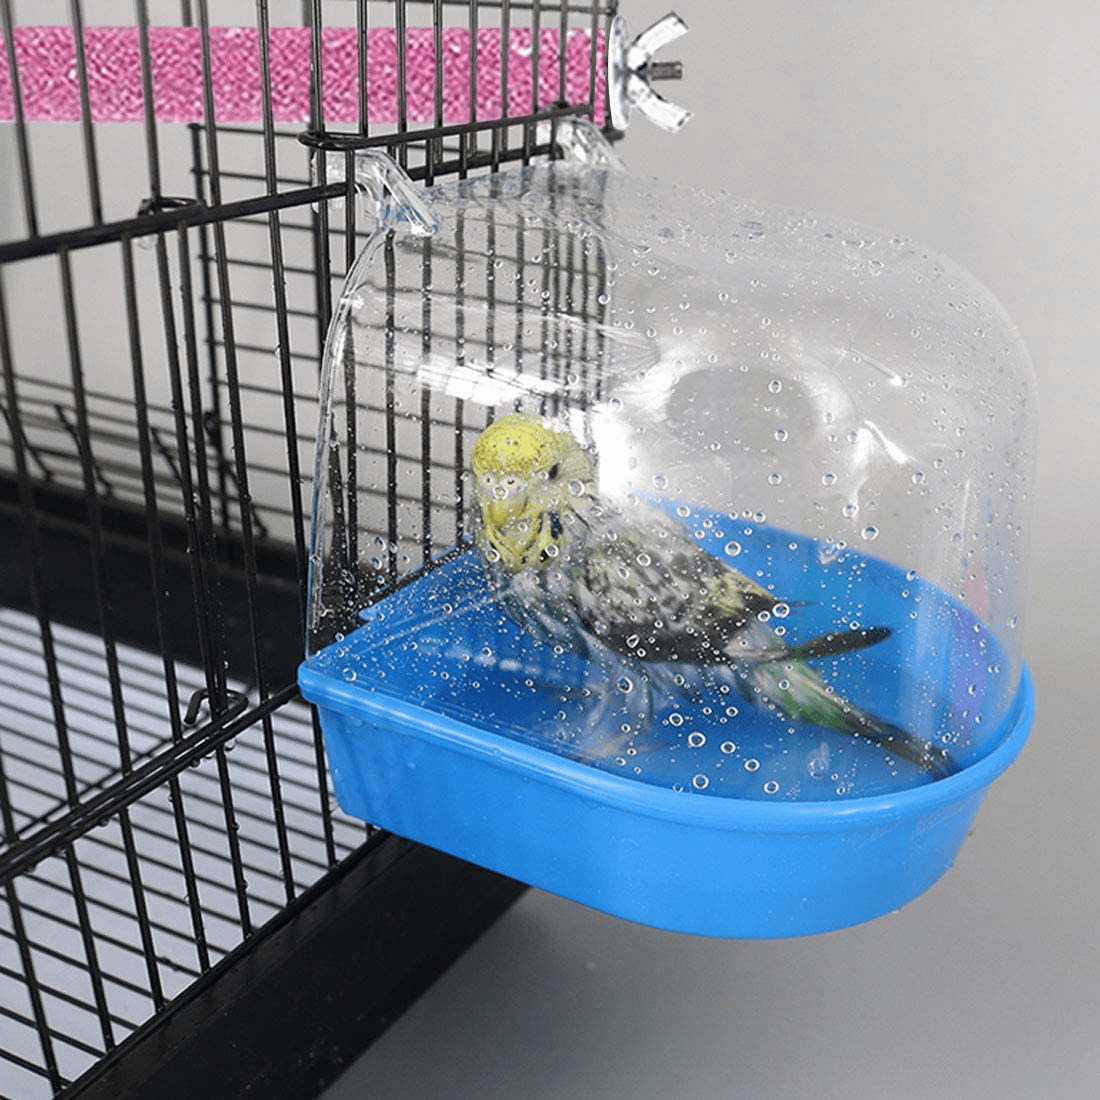 Parrot Bath Box Bird Bathtub Parakeet Bathing Tube with Bird Perches Stand Paw Grinding Cage Accessories Ideal for Small Brids Lovebirds Canary Finches(5 PCS Random Color)